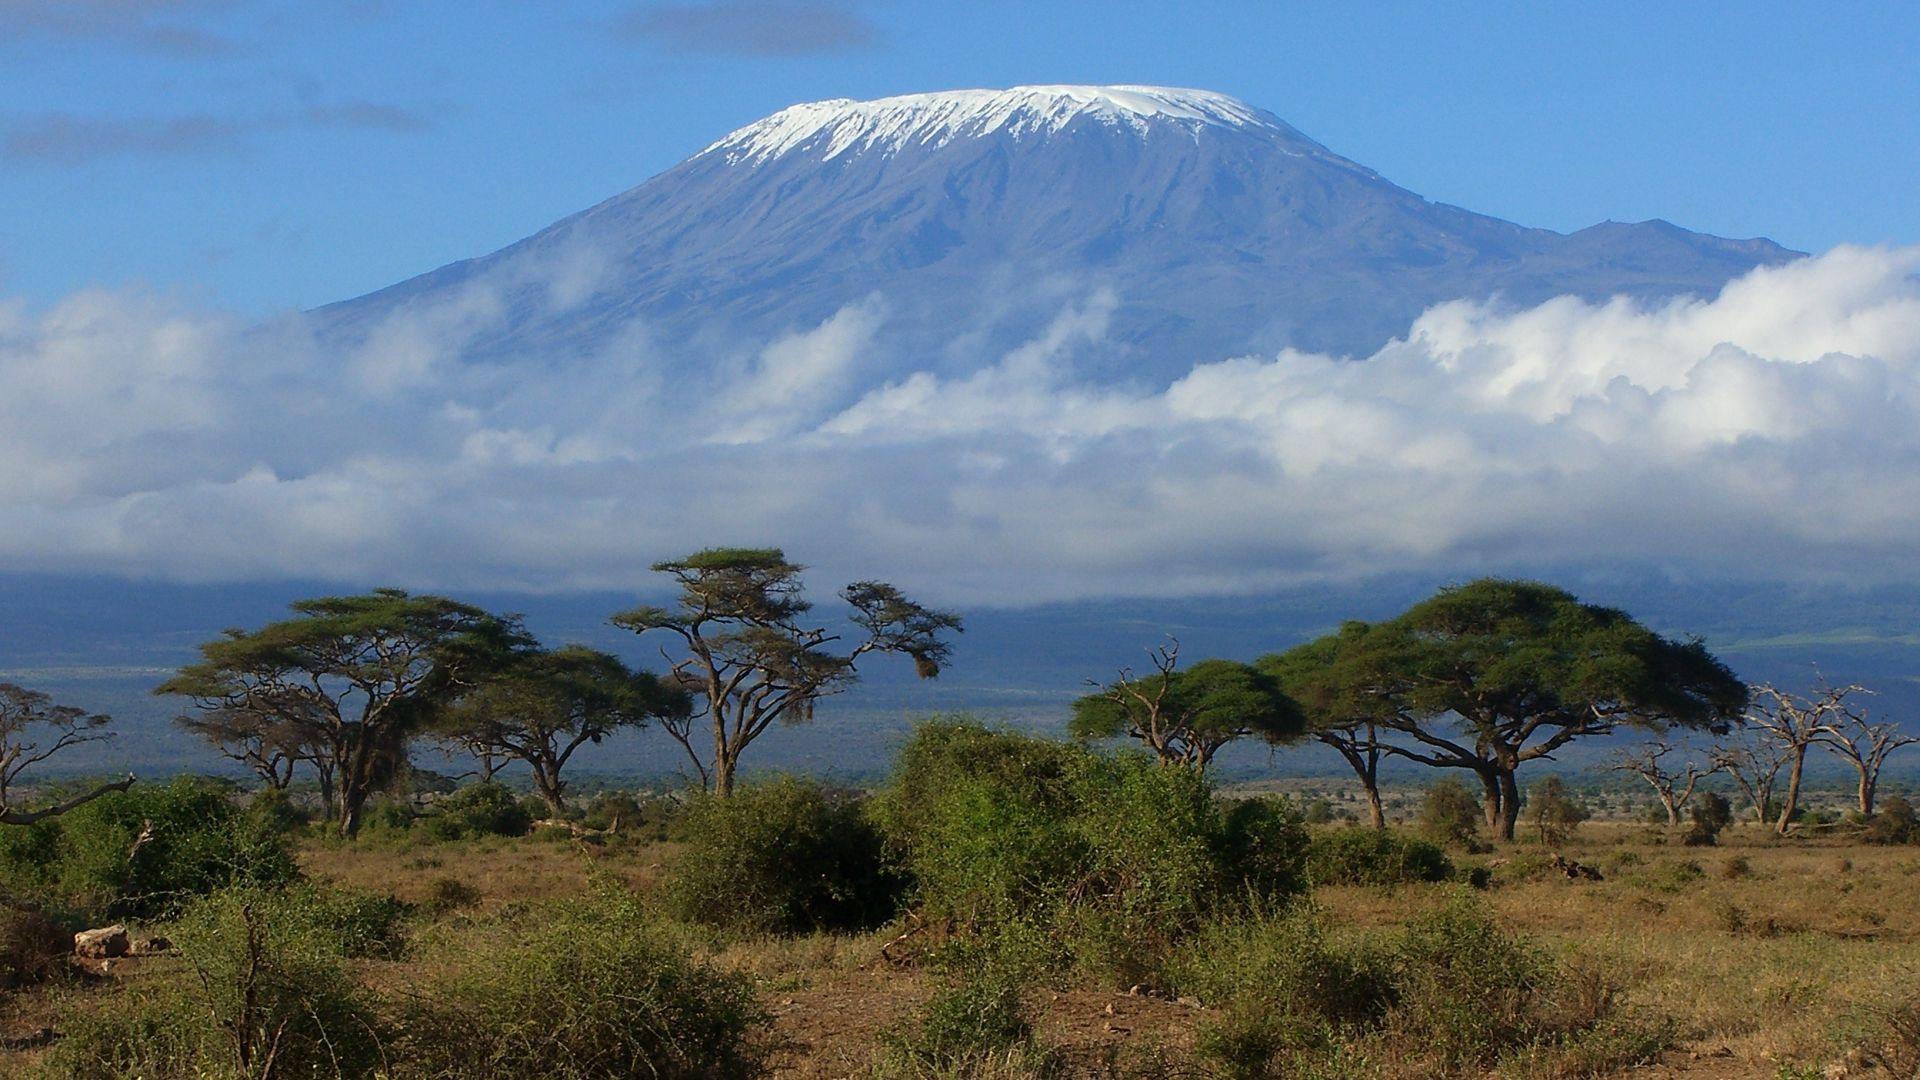 Mount Kilimanjaro One desk 4K PC and Mac wallpapers